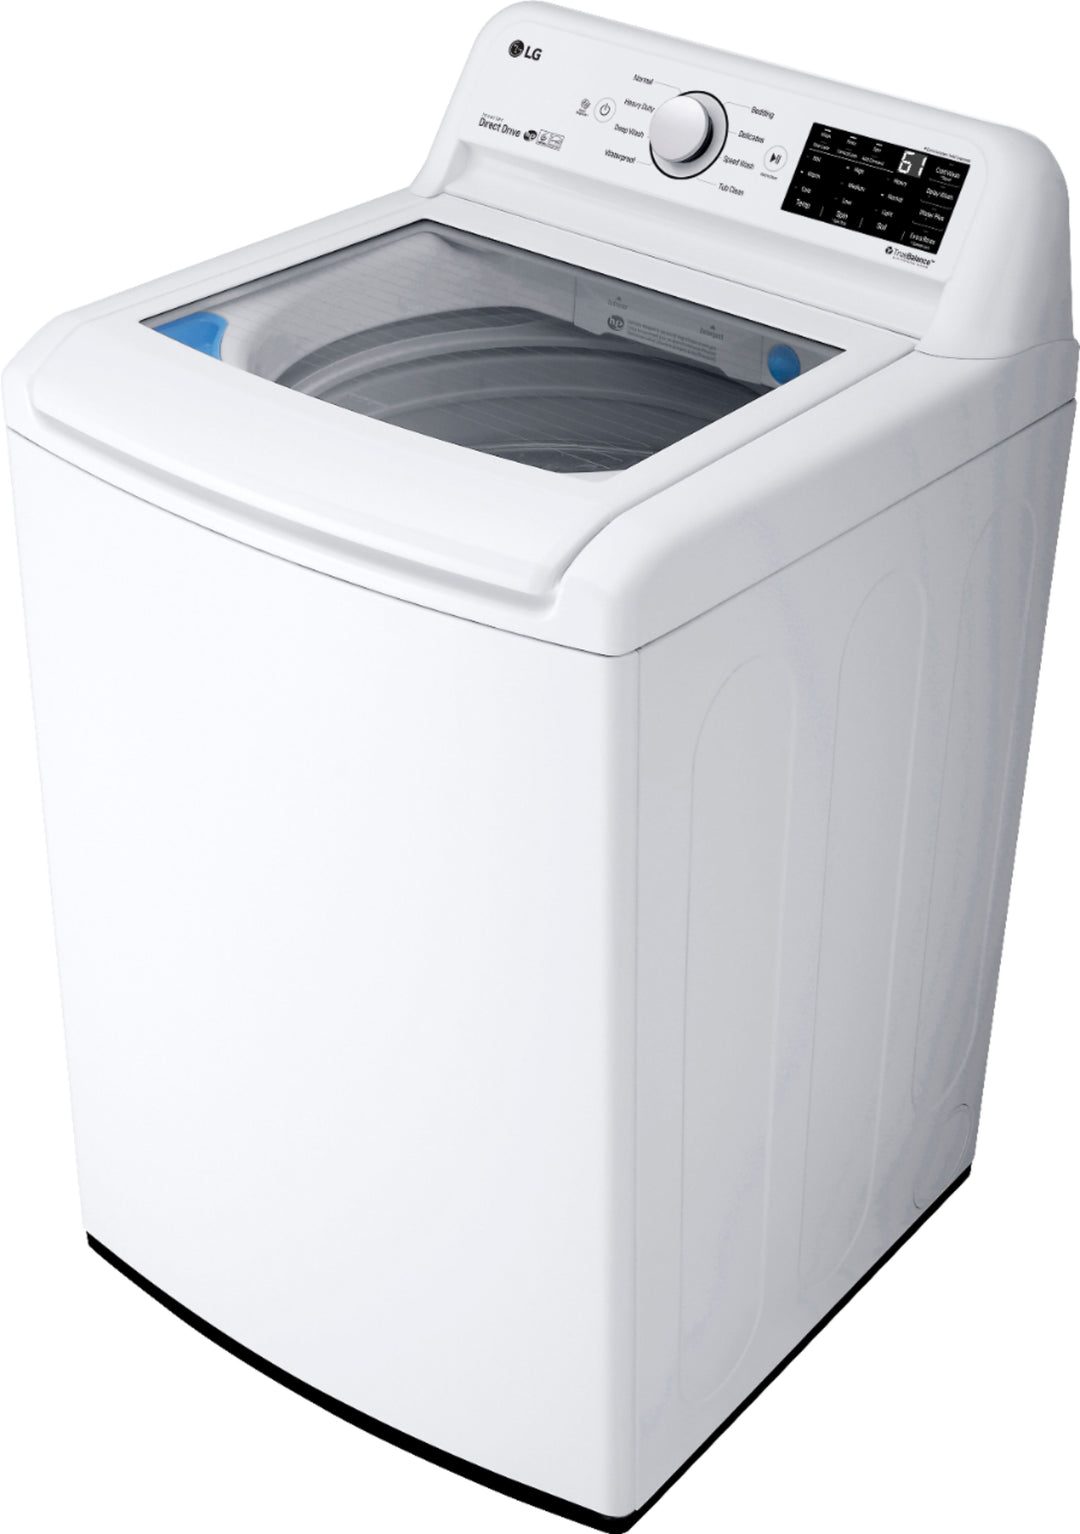 LG - 4.5 Cu. Ft. High-Efficiency Top-Load Washer with TurboDrum Technology - White_2